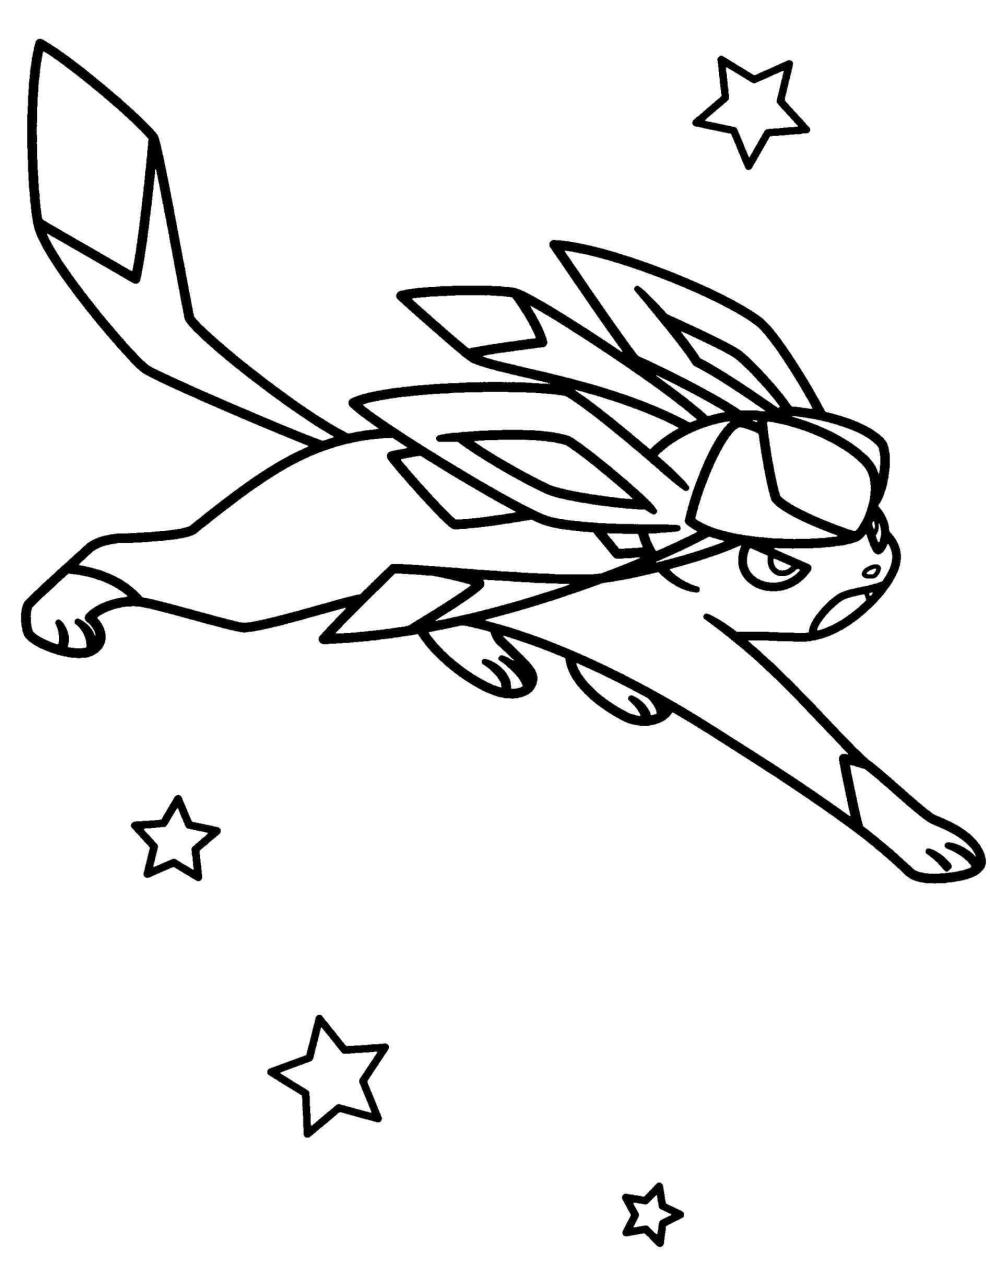 The best free Eevee coloring page images. Download from 505 free